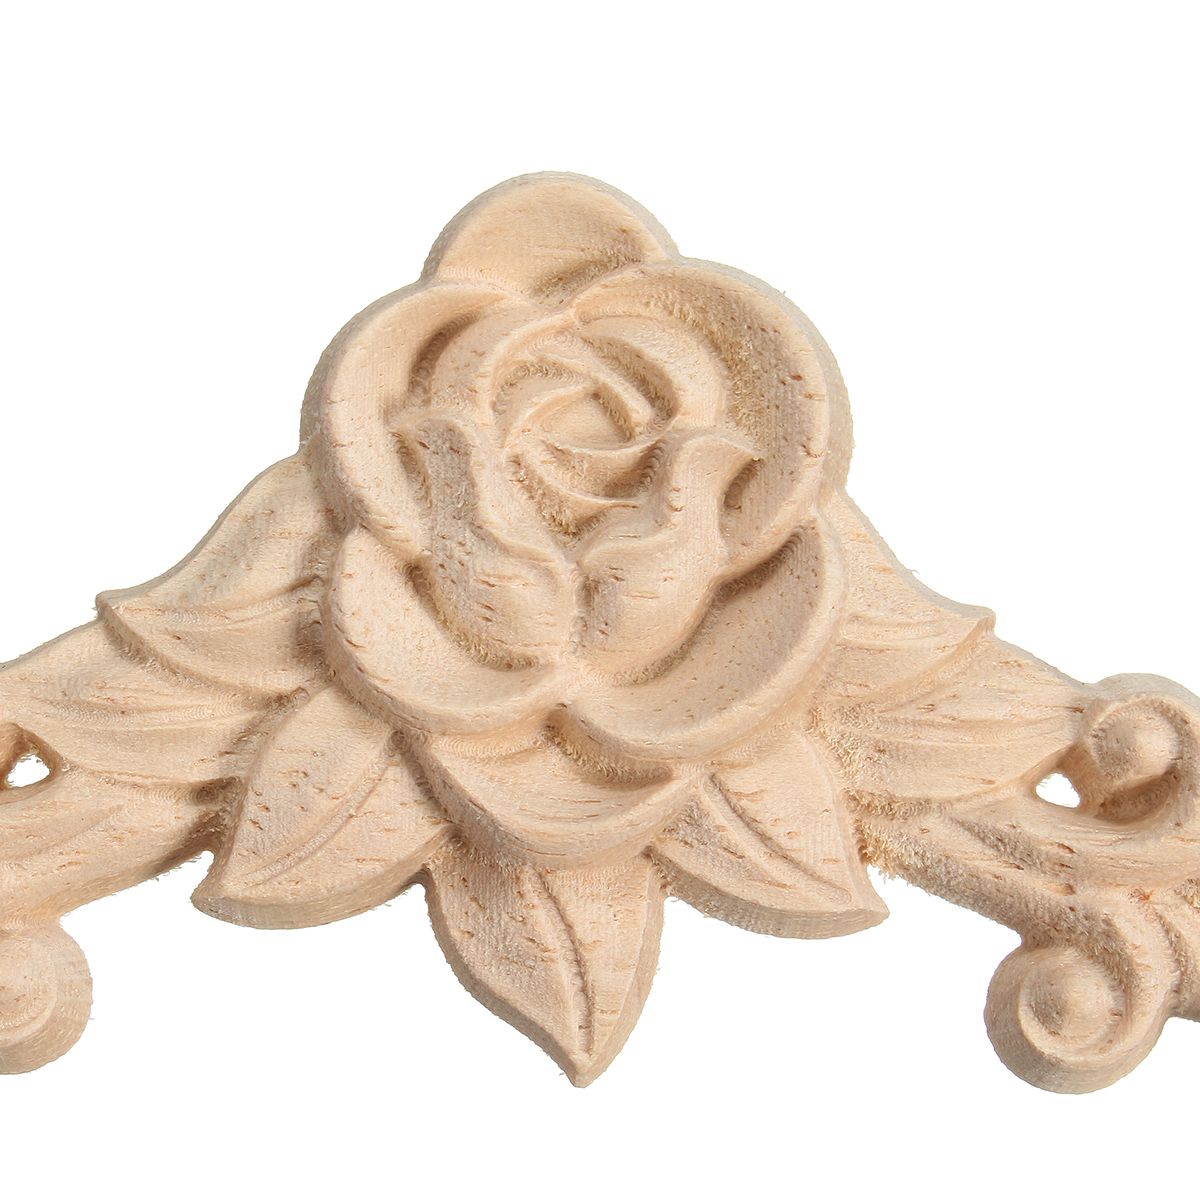 Wood-Carving-Applique-Unpainted-Flower-Applique-Wood-Carving-Decal-for-Furniture-Cabinet-8x8cm-1162704